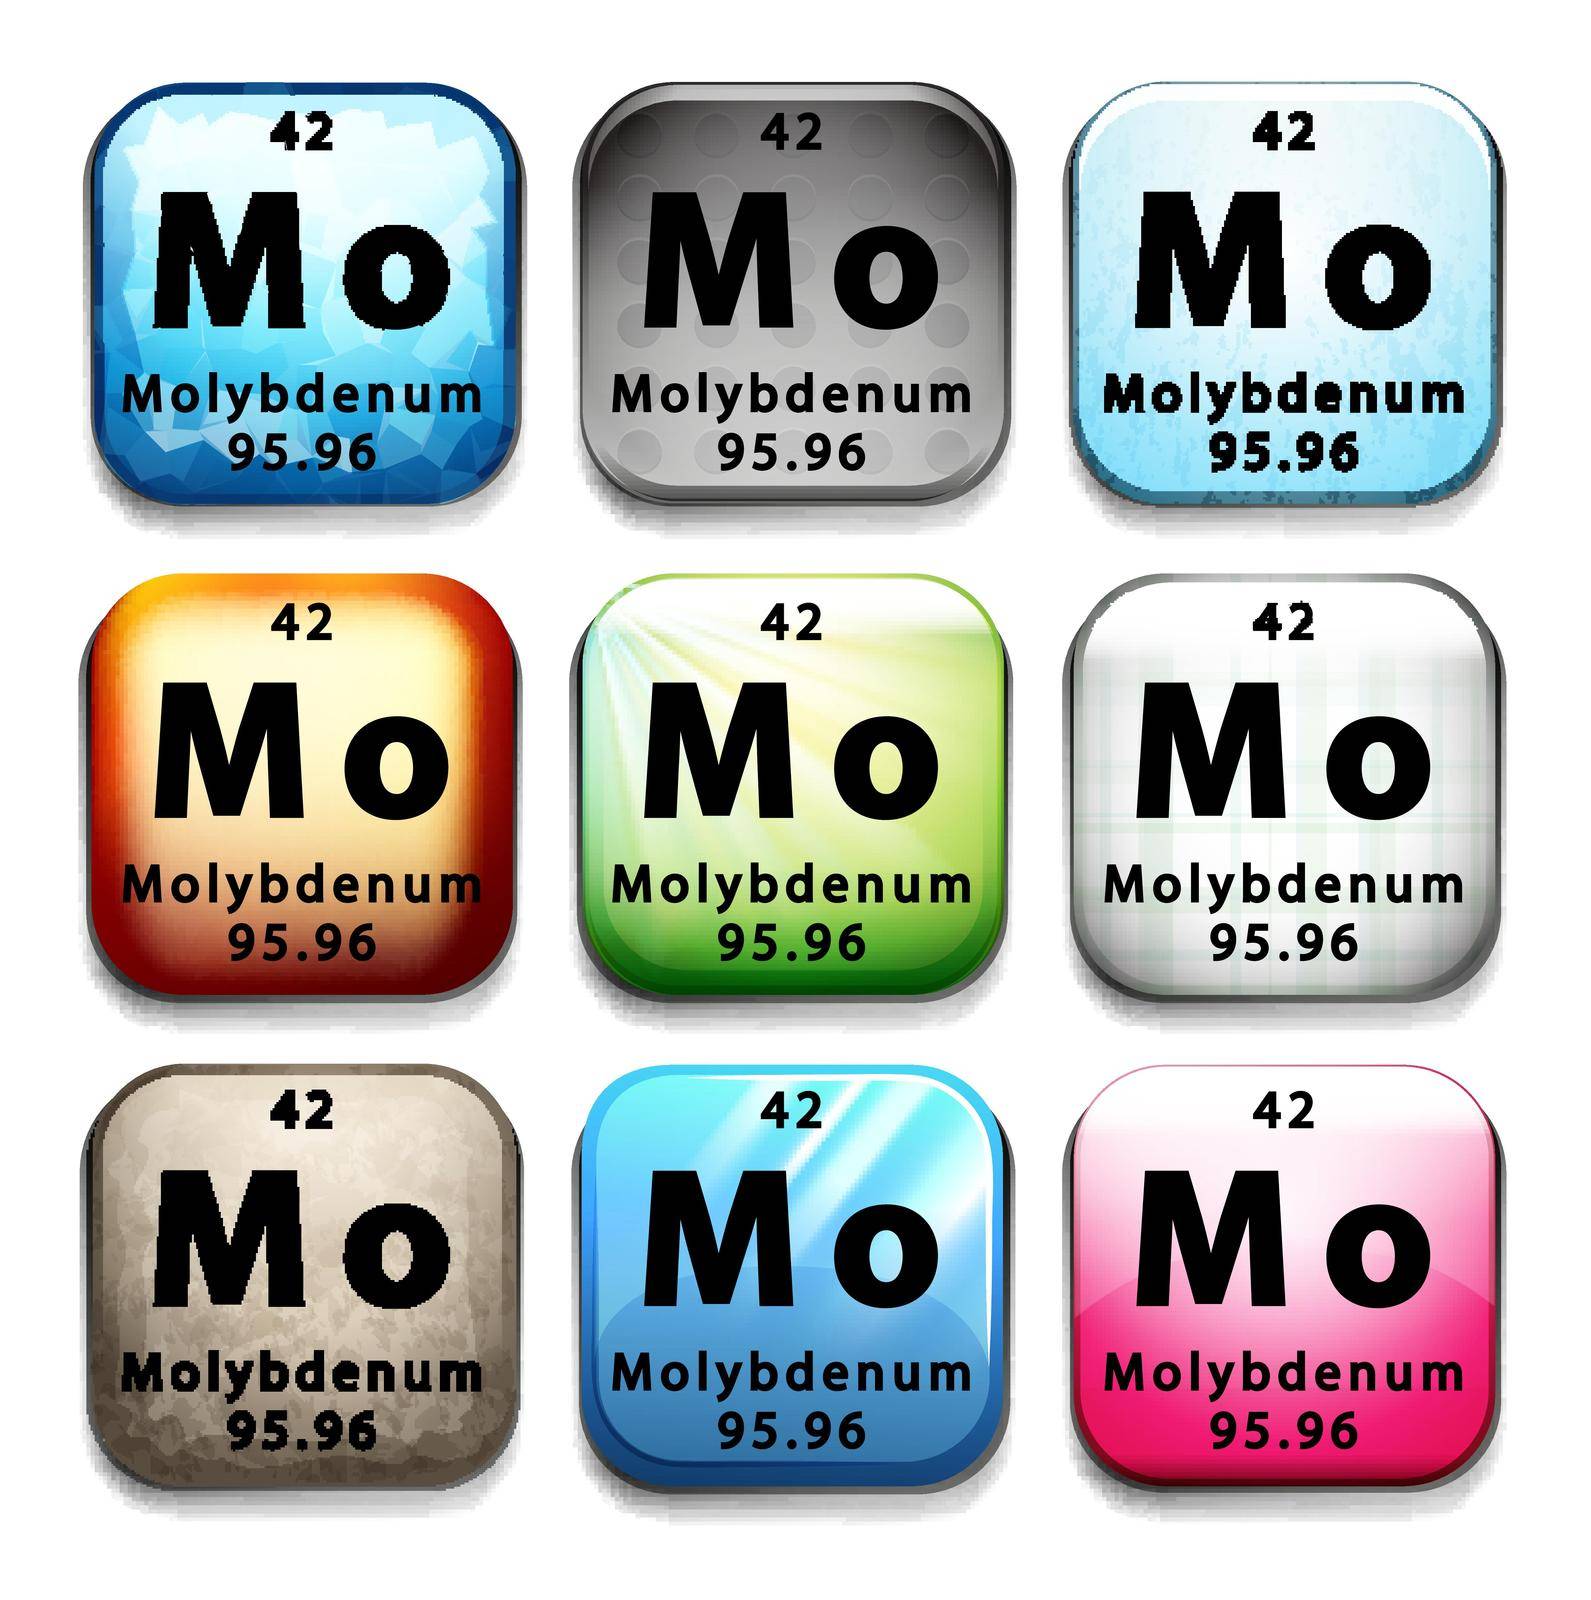 A periodic table showing Molybdenum by iimages